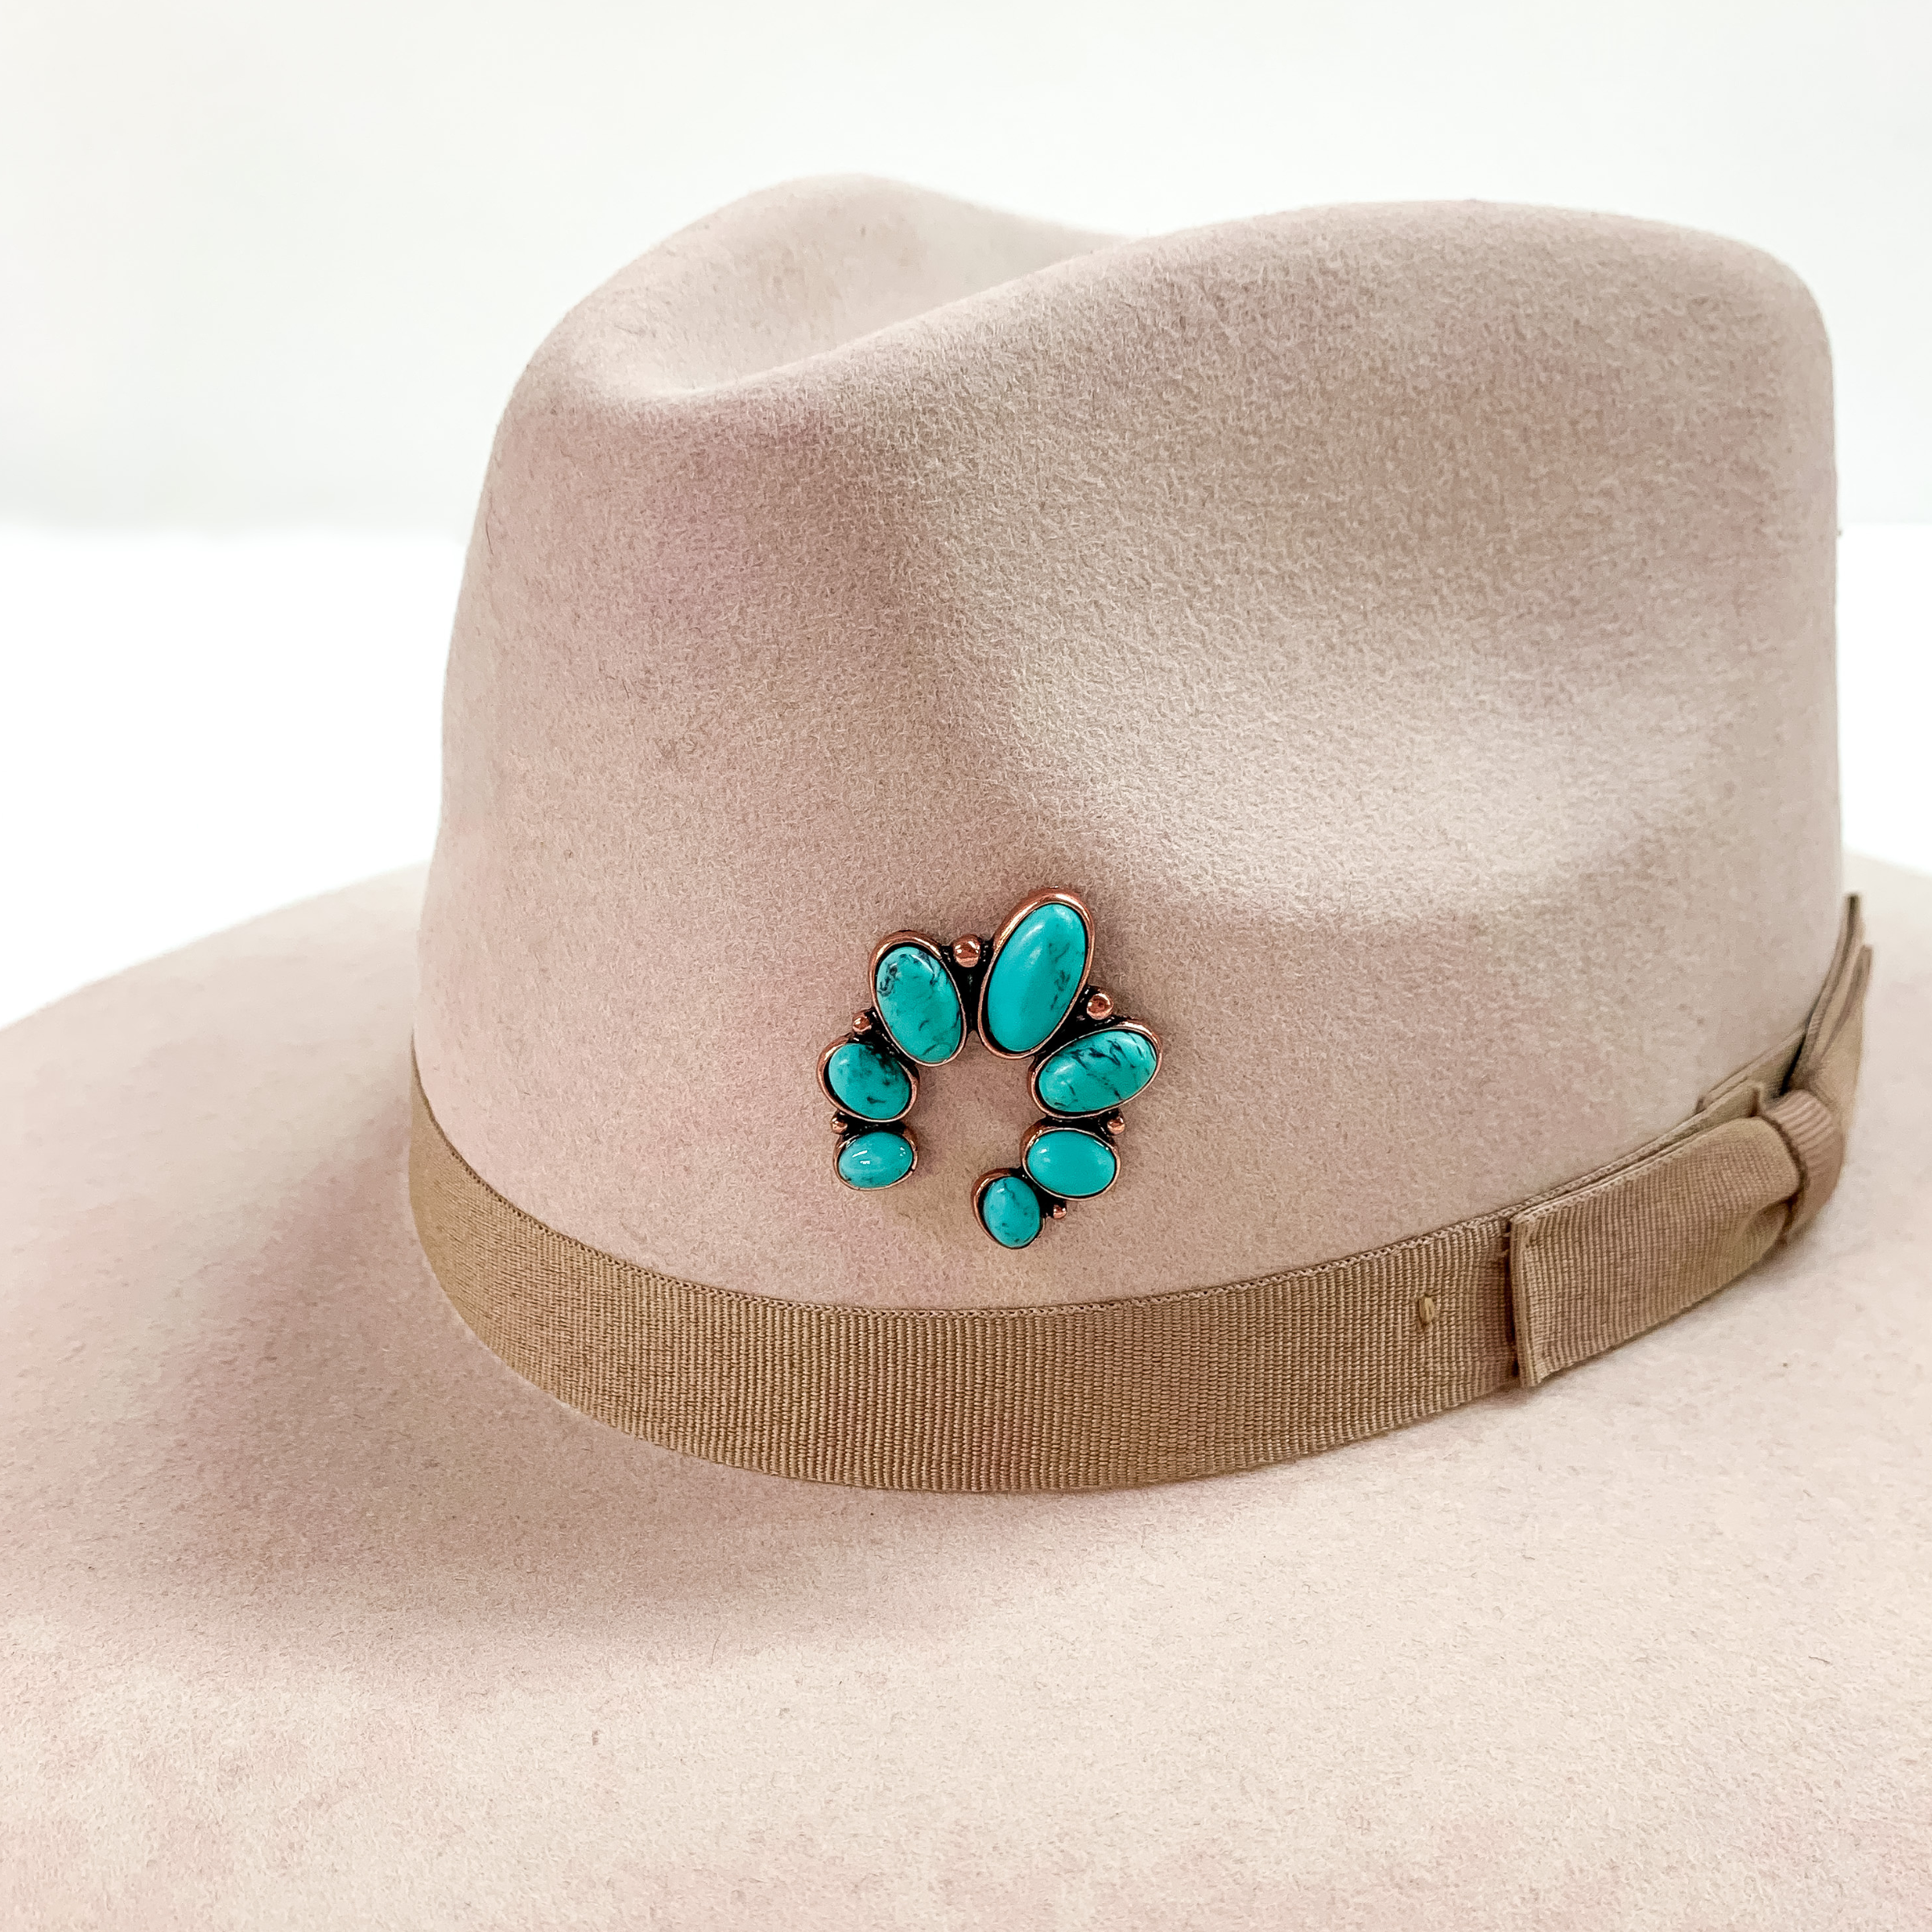 Naja Hat Pin with Turquoise Stones in Copper Tone - Giddy Up Glamour Boutique